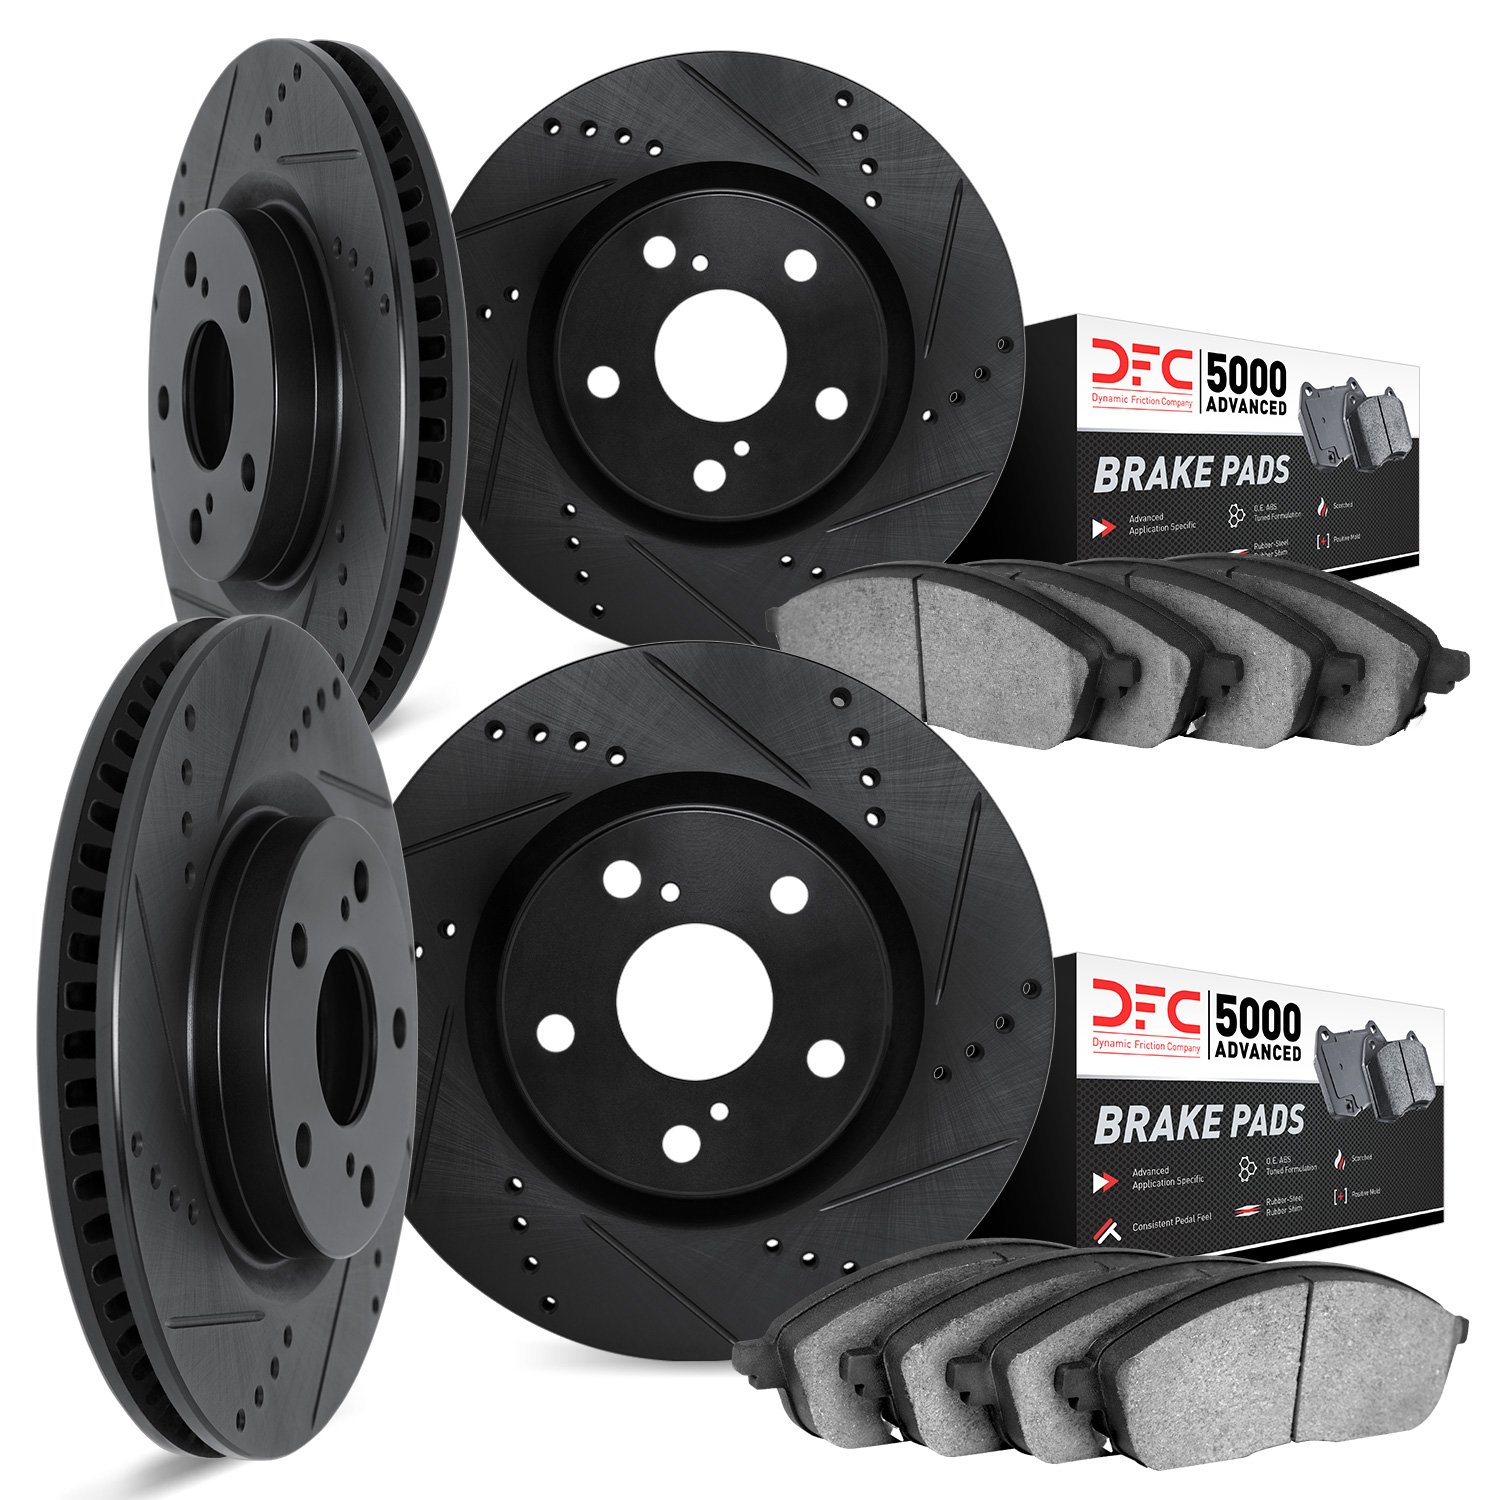 8504-67101 Drilled/Slotted Brake Rotors w/5000 Advanced Brake Pads Kit [Black], 2003-2004 Infiniti/Nissan, Position: Front and R